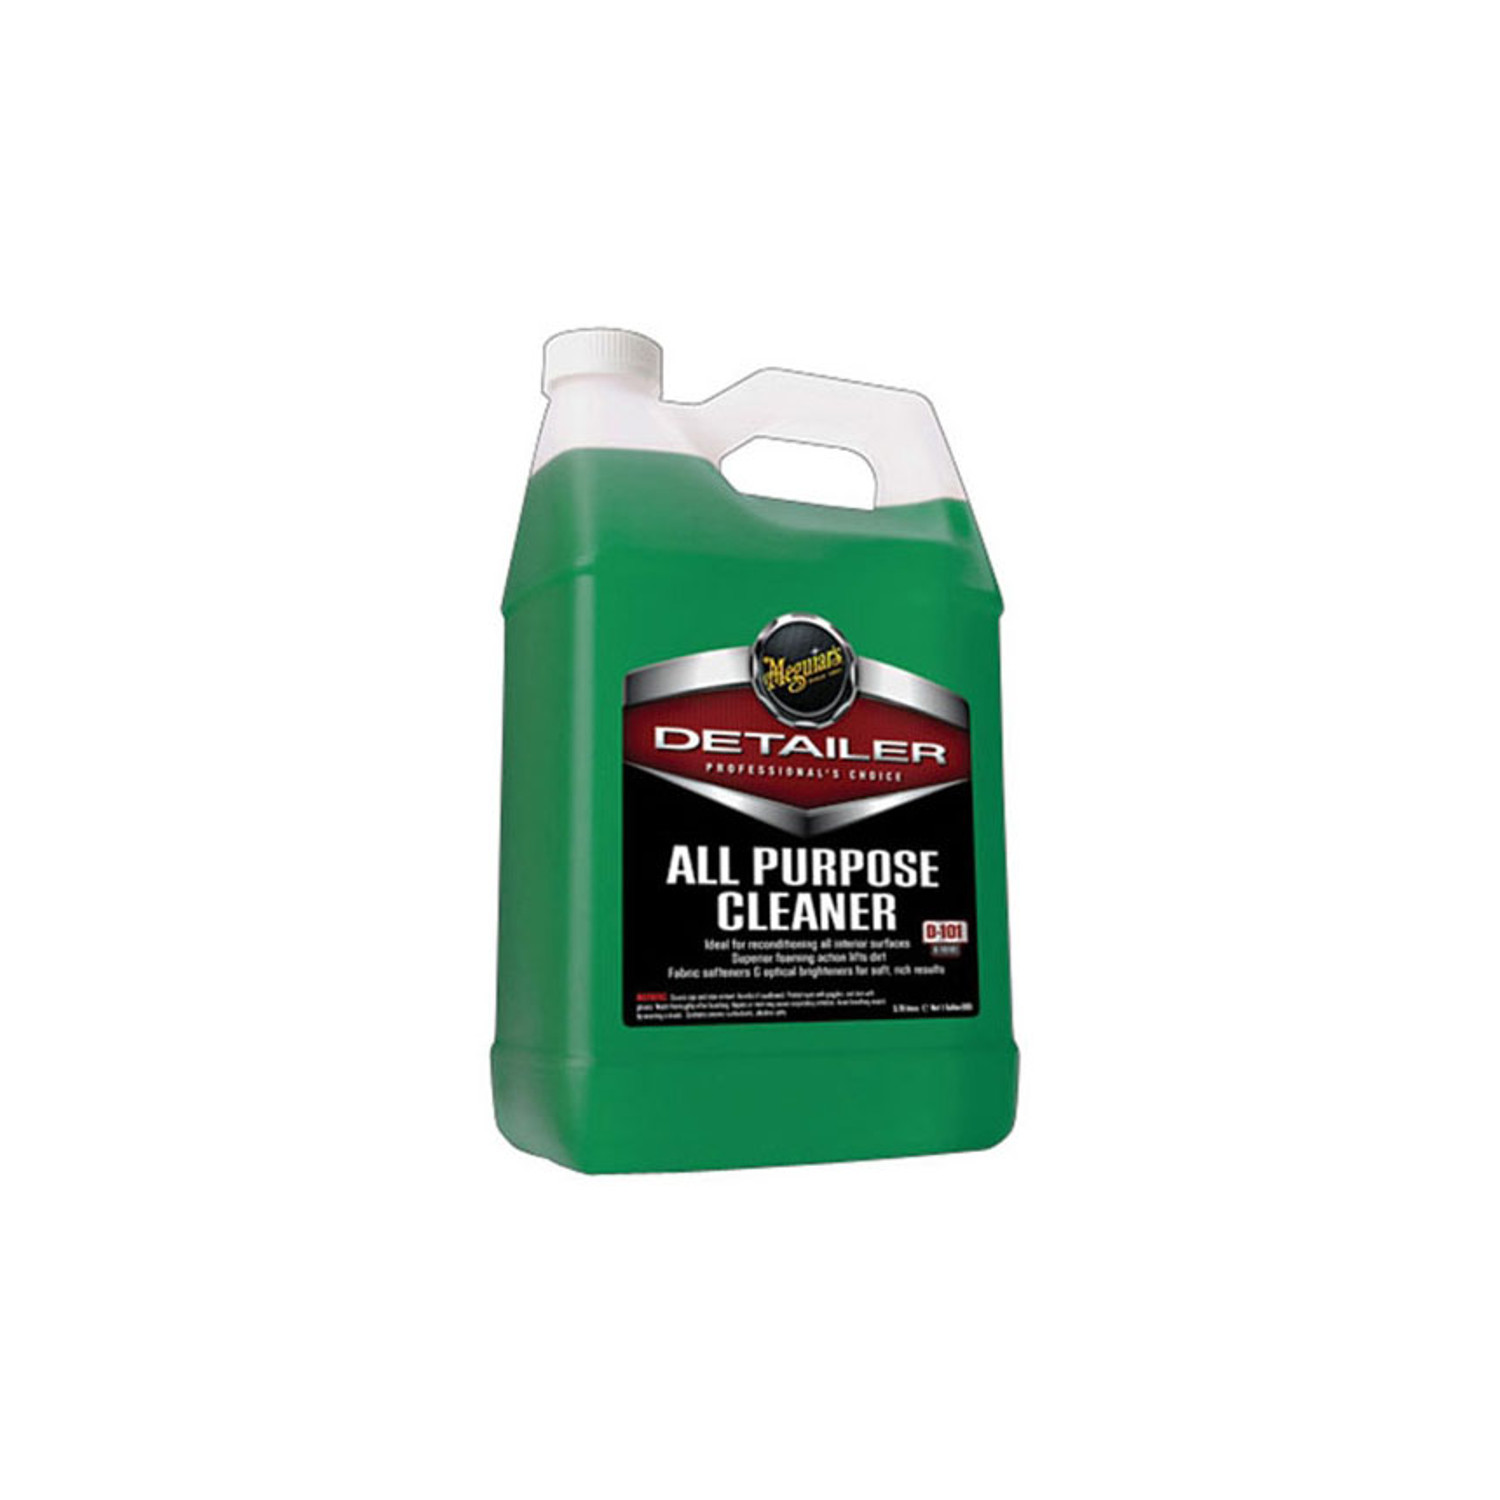 Meguiars D101 All Purpose Cleaner 1 Gallon | Concentrated APC D10101